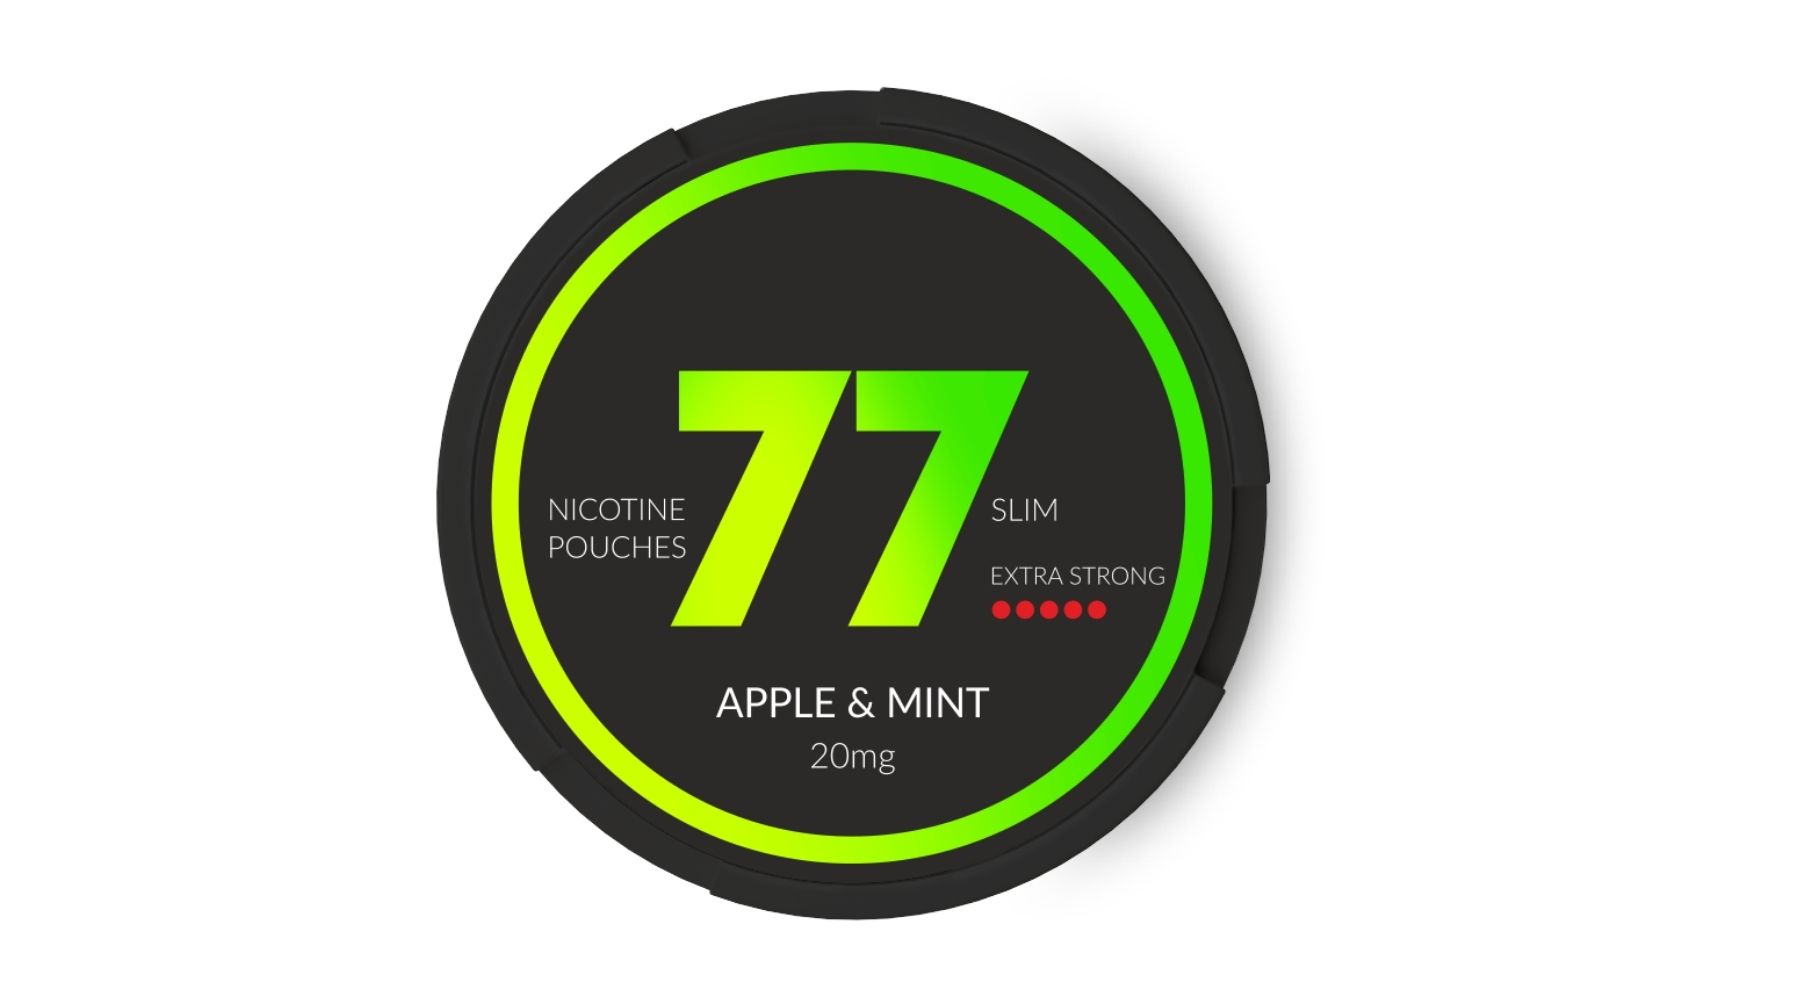 A tin of Apple & Mint 77 nicotine popuches